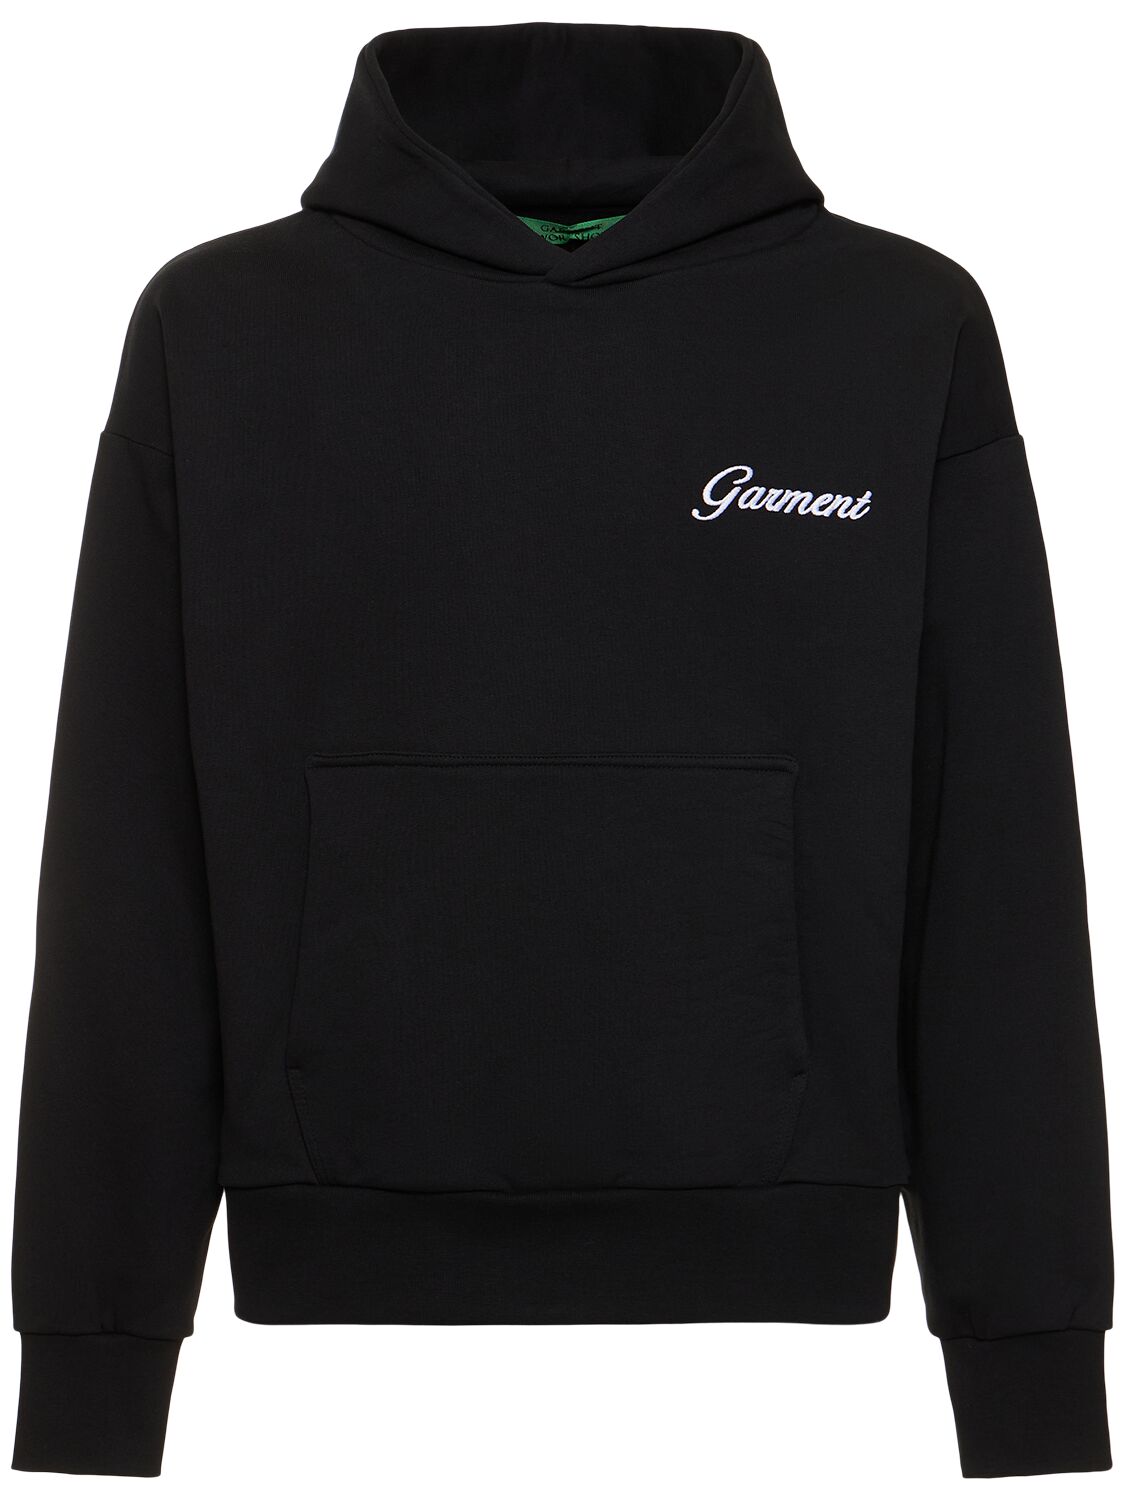 Garment Workshop If You Know You Know Embroidered Hoodie In Chaos Black